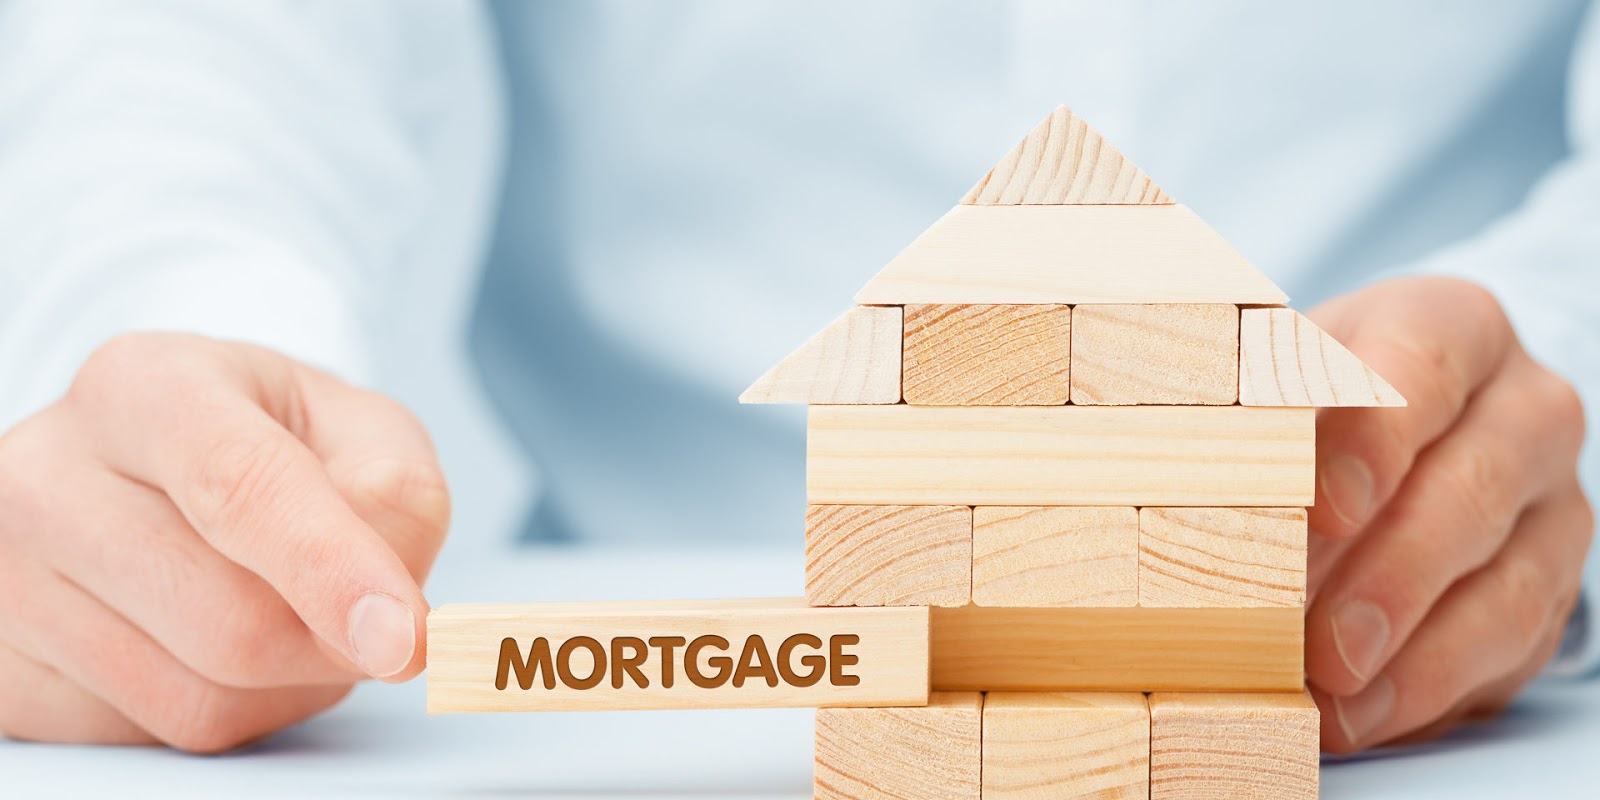 Know Before You Go! Mortgage Prep & Home Affordability